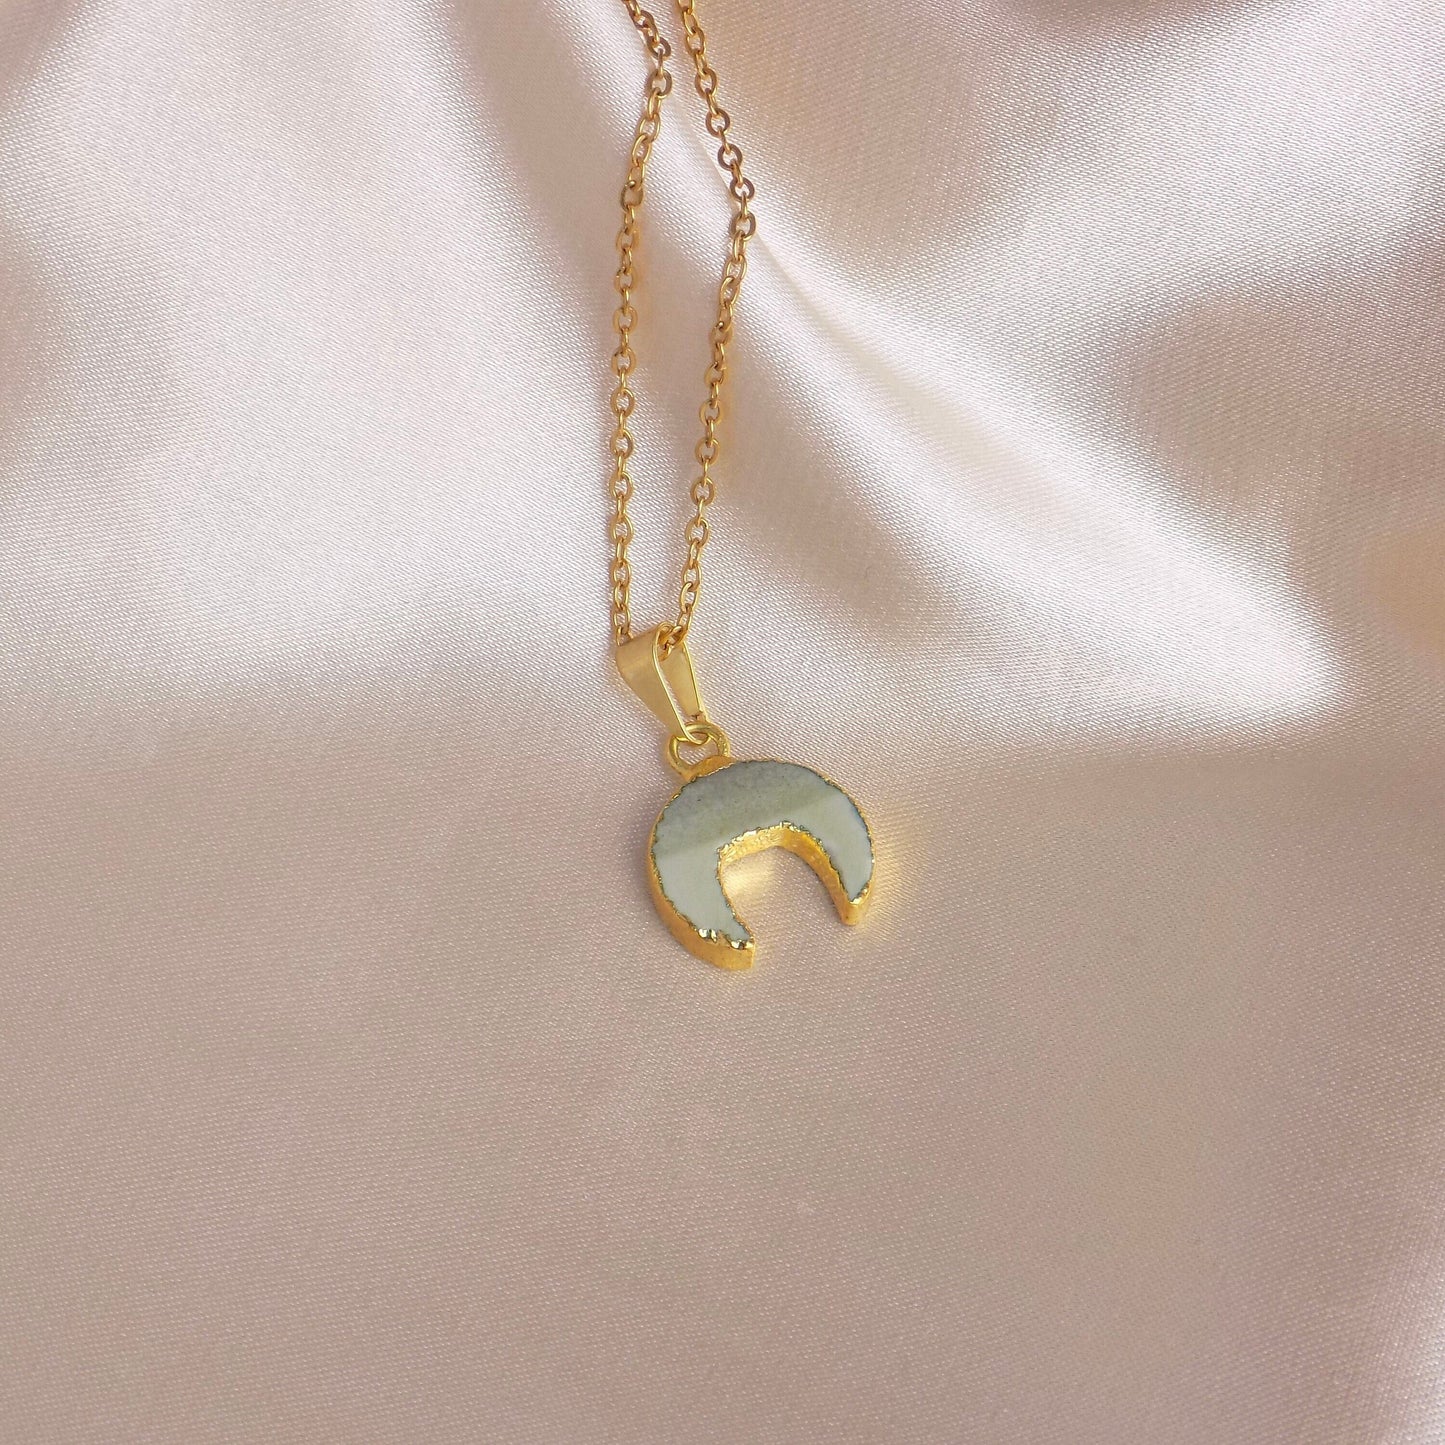 Small Double Horn Necklace Gold, Green Jasper Gemstone Pendant, Gifts For Her, M6-778